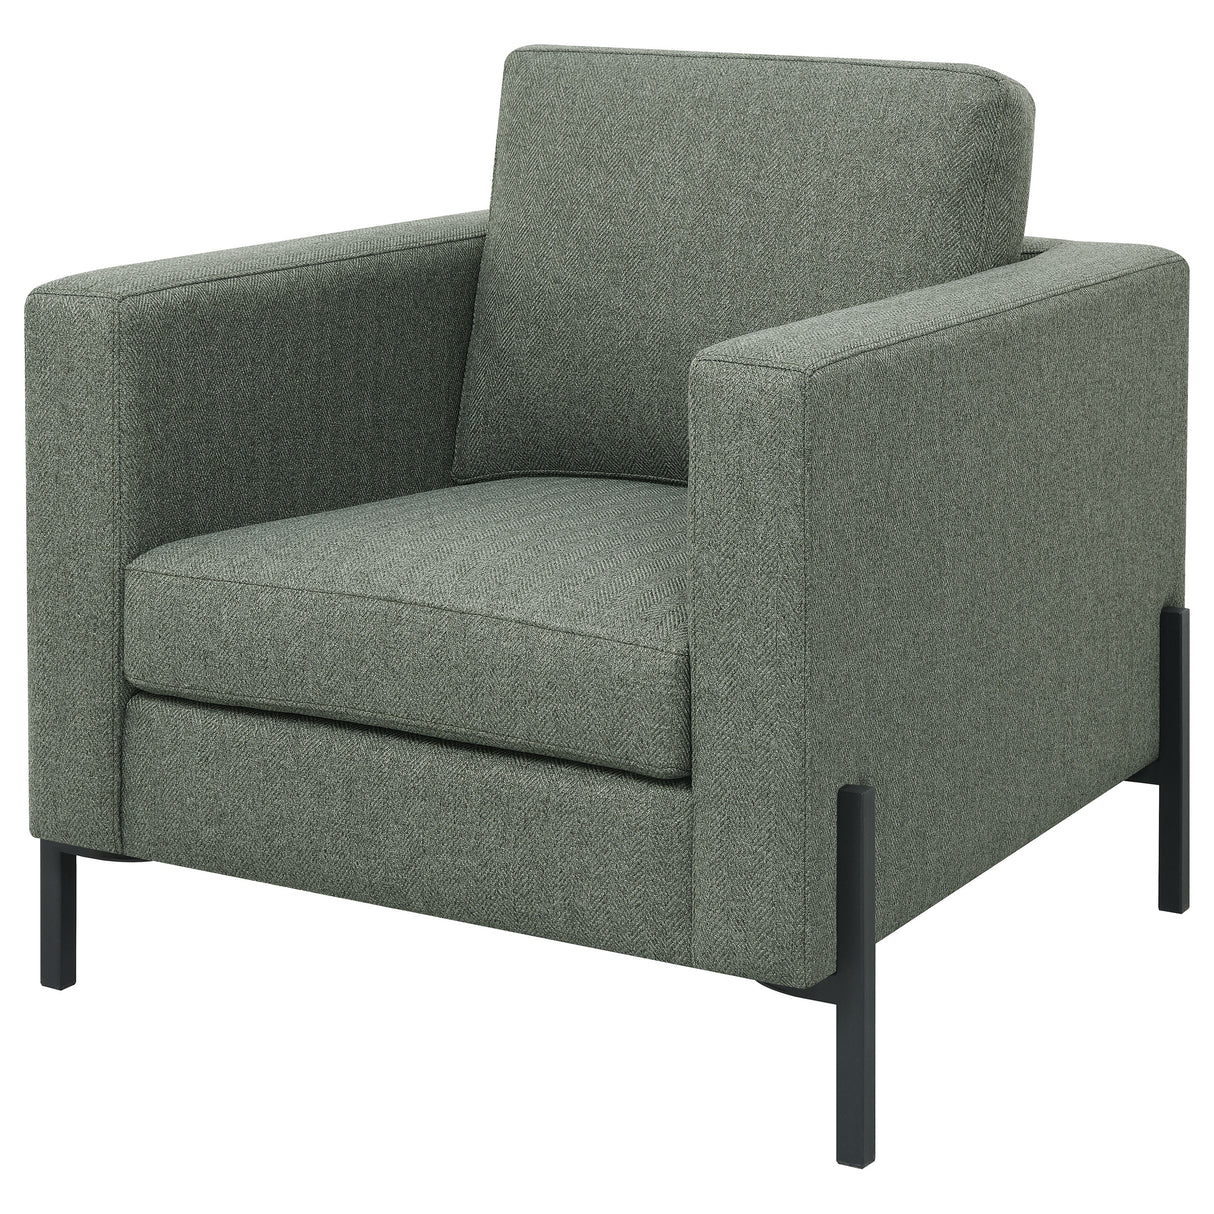 Chair - Tilly Upholstered Track Arms Chair Sage